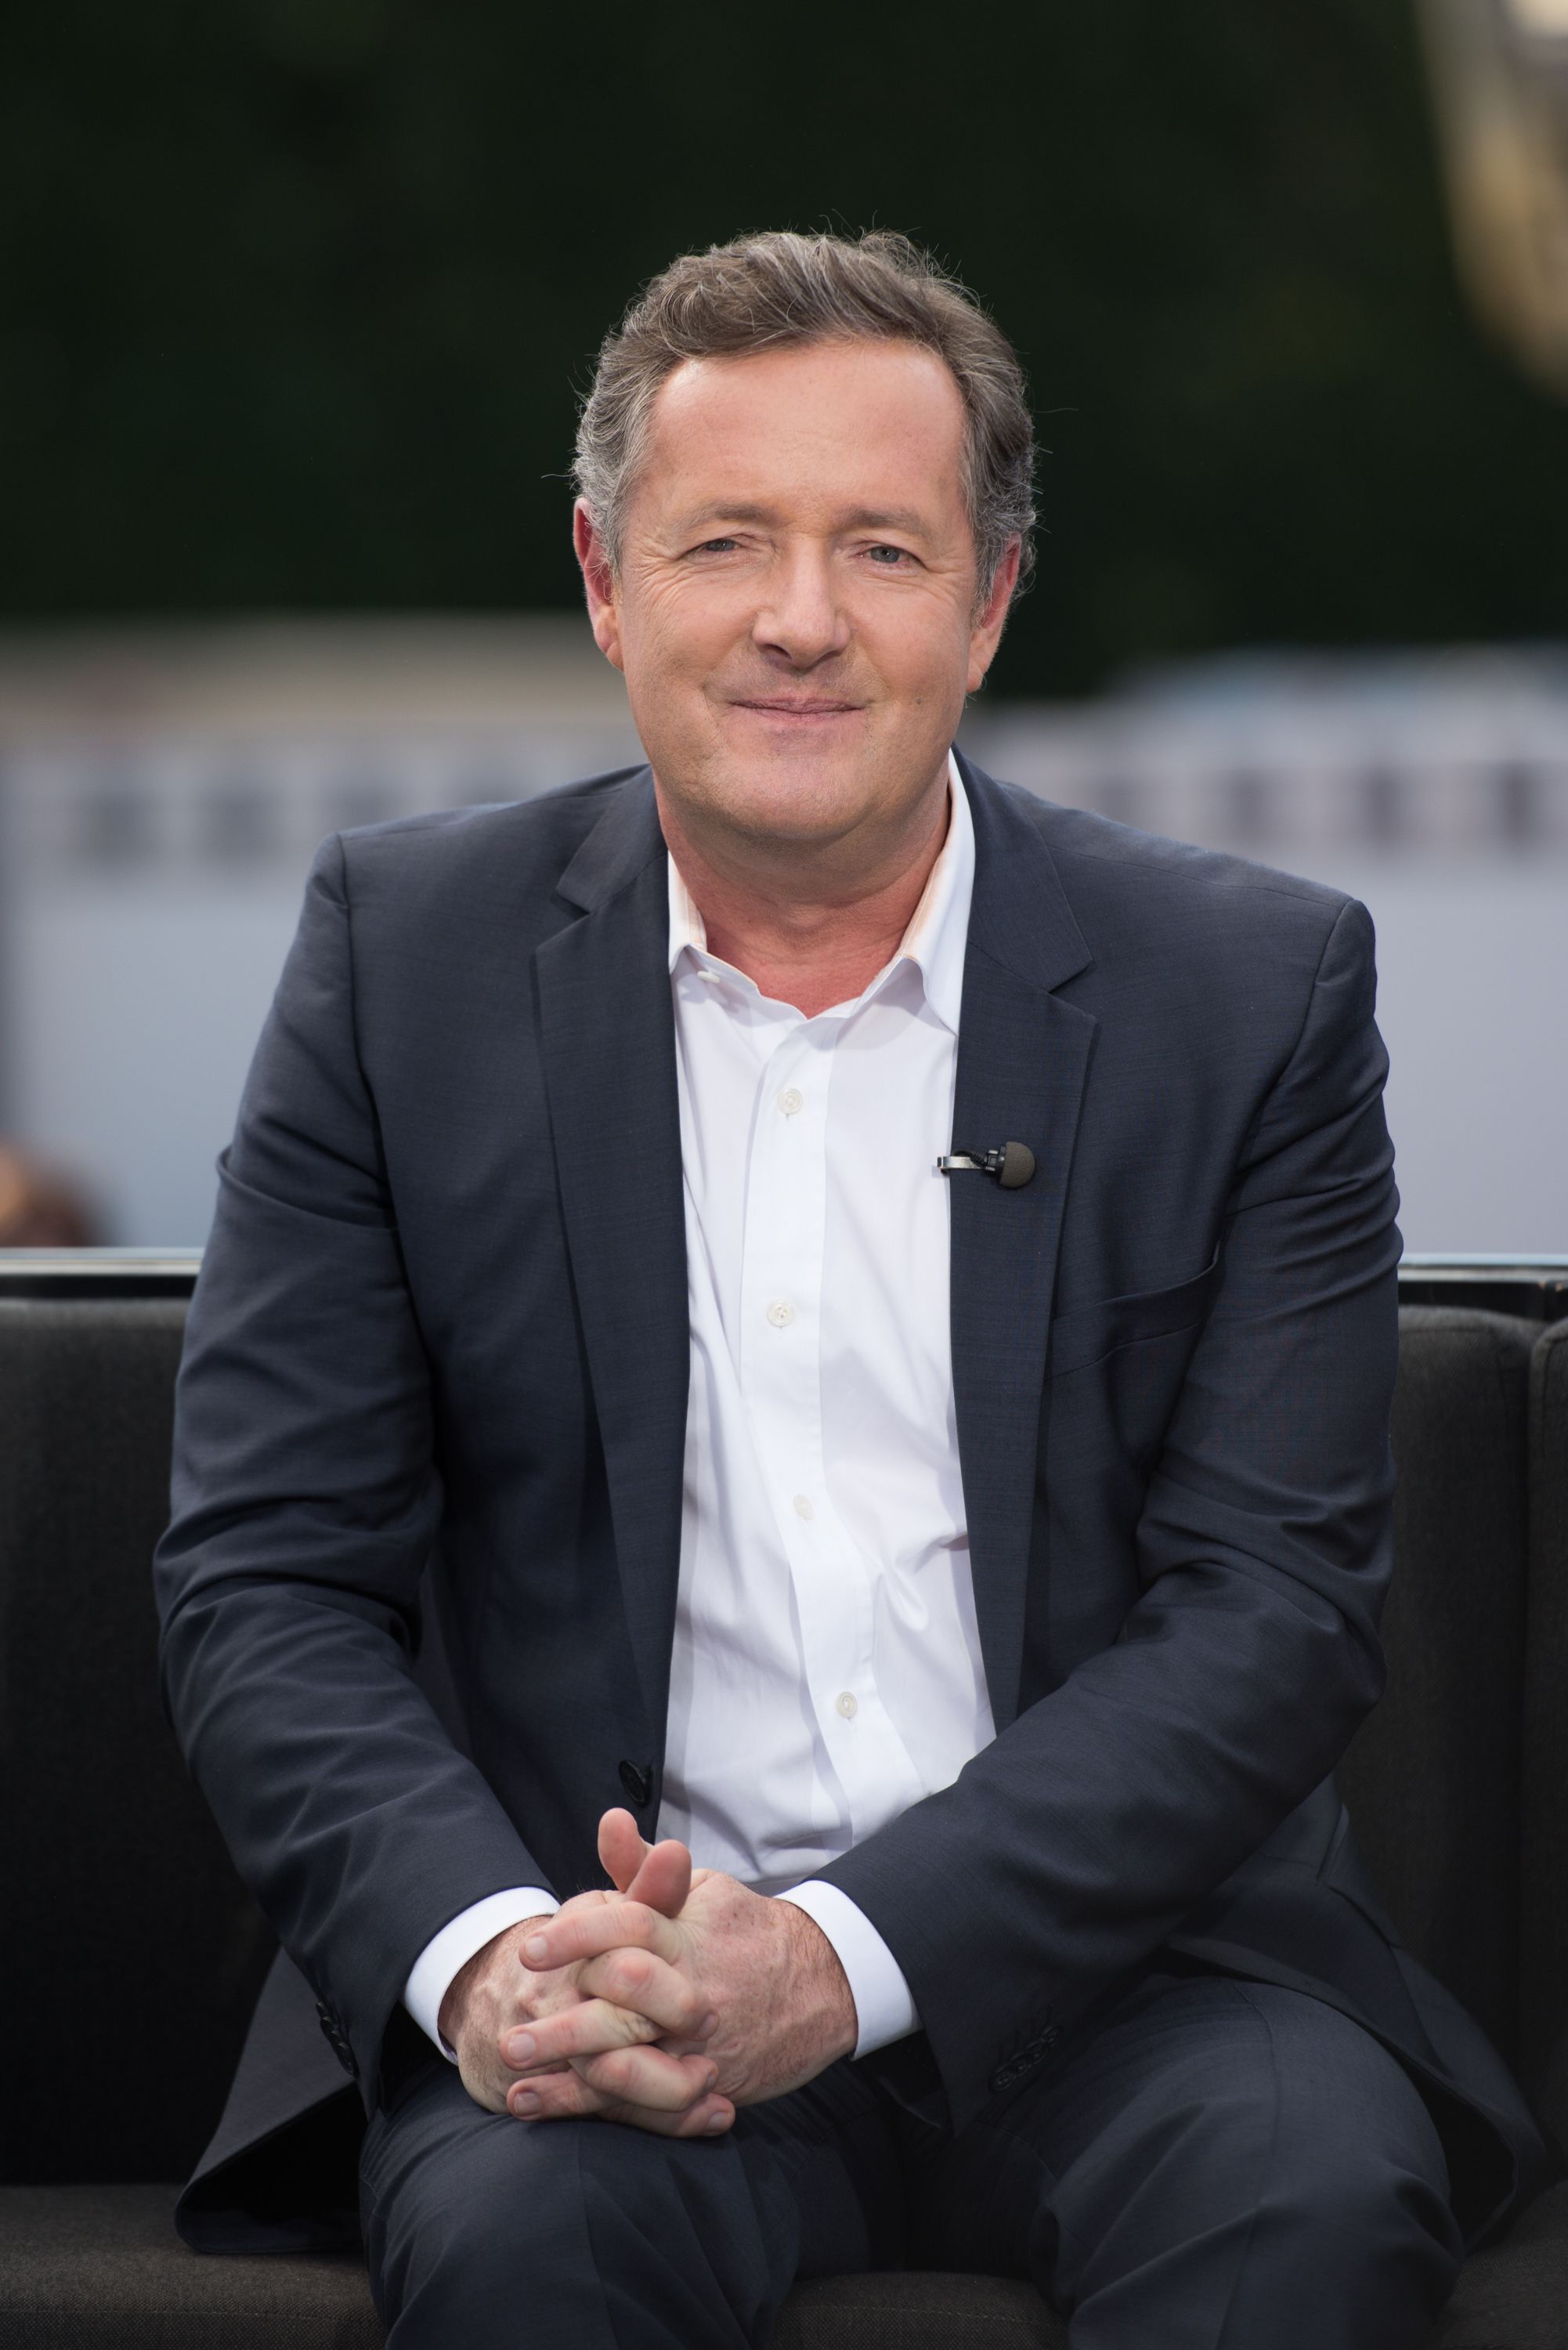 Piers Morgan visits "Extra" at Universal Studios Hollywood on February 11, 2016, in Universal City, California | Photo: Noel Vasquez/Getty Images